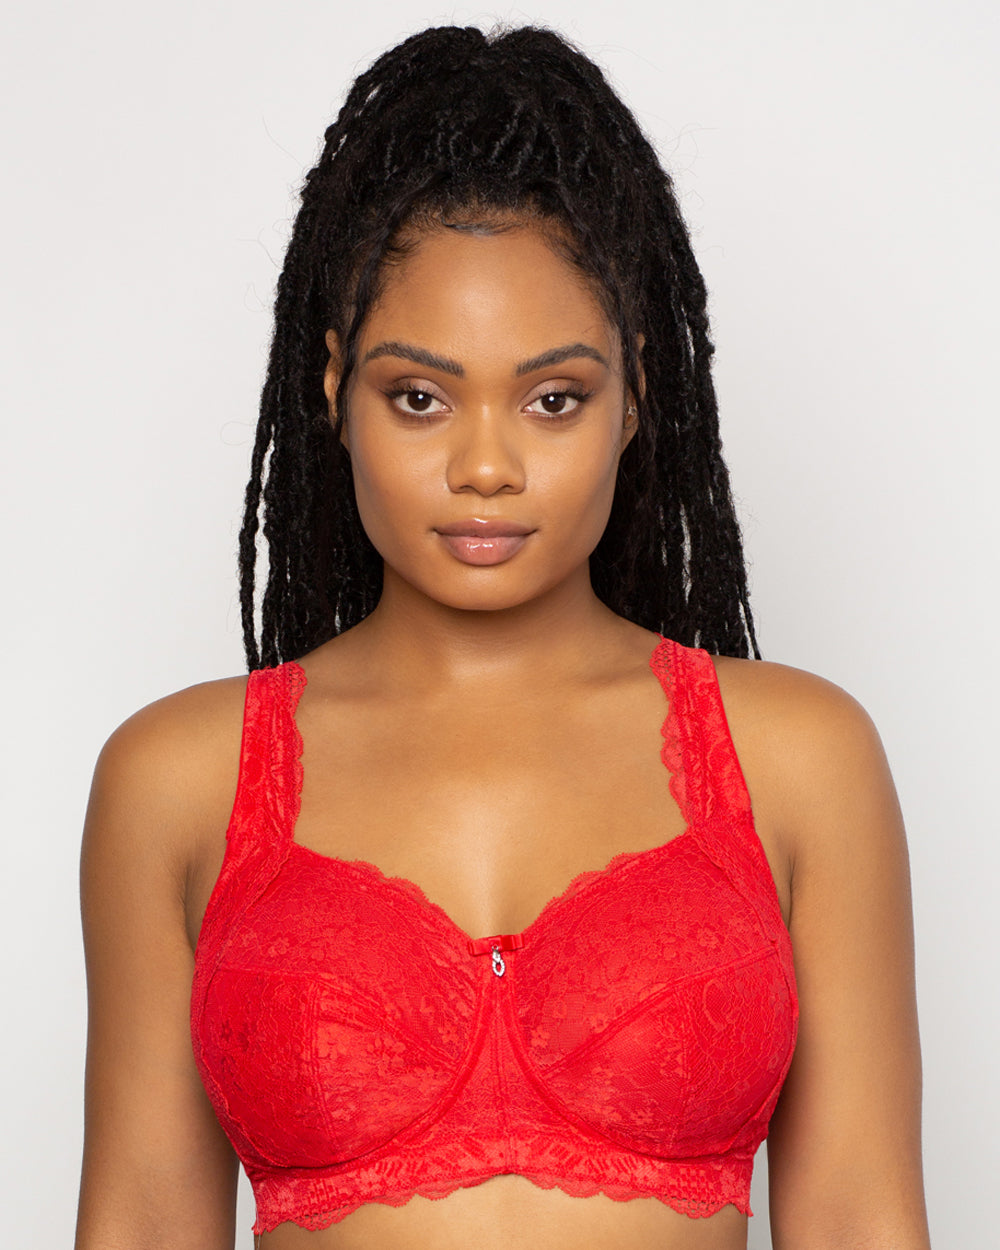 Curvy Couture Women's Plus Size No Show Lace Unlined Underwire Bra Diva Red  38DDD